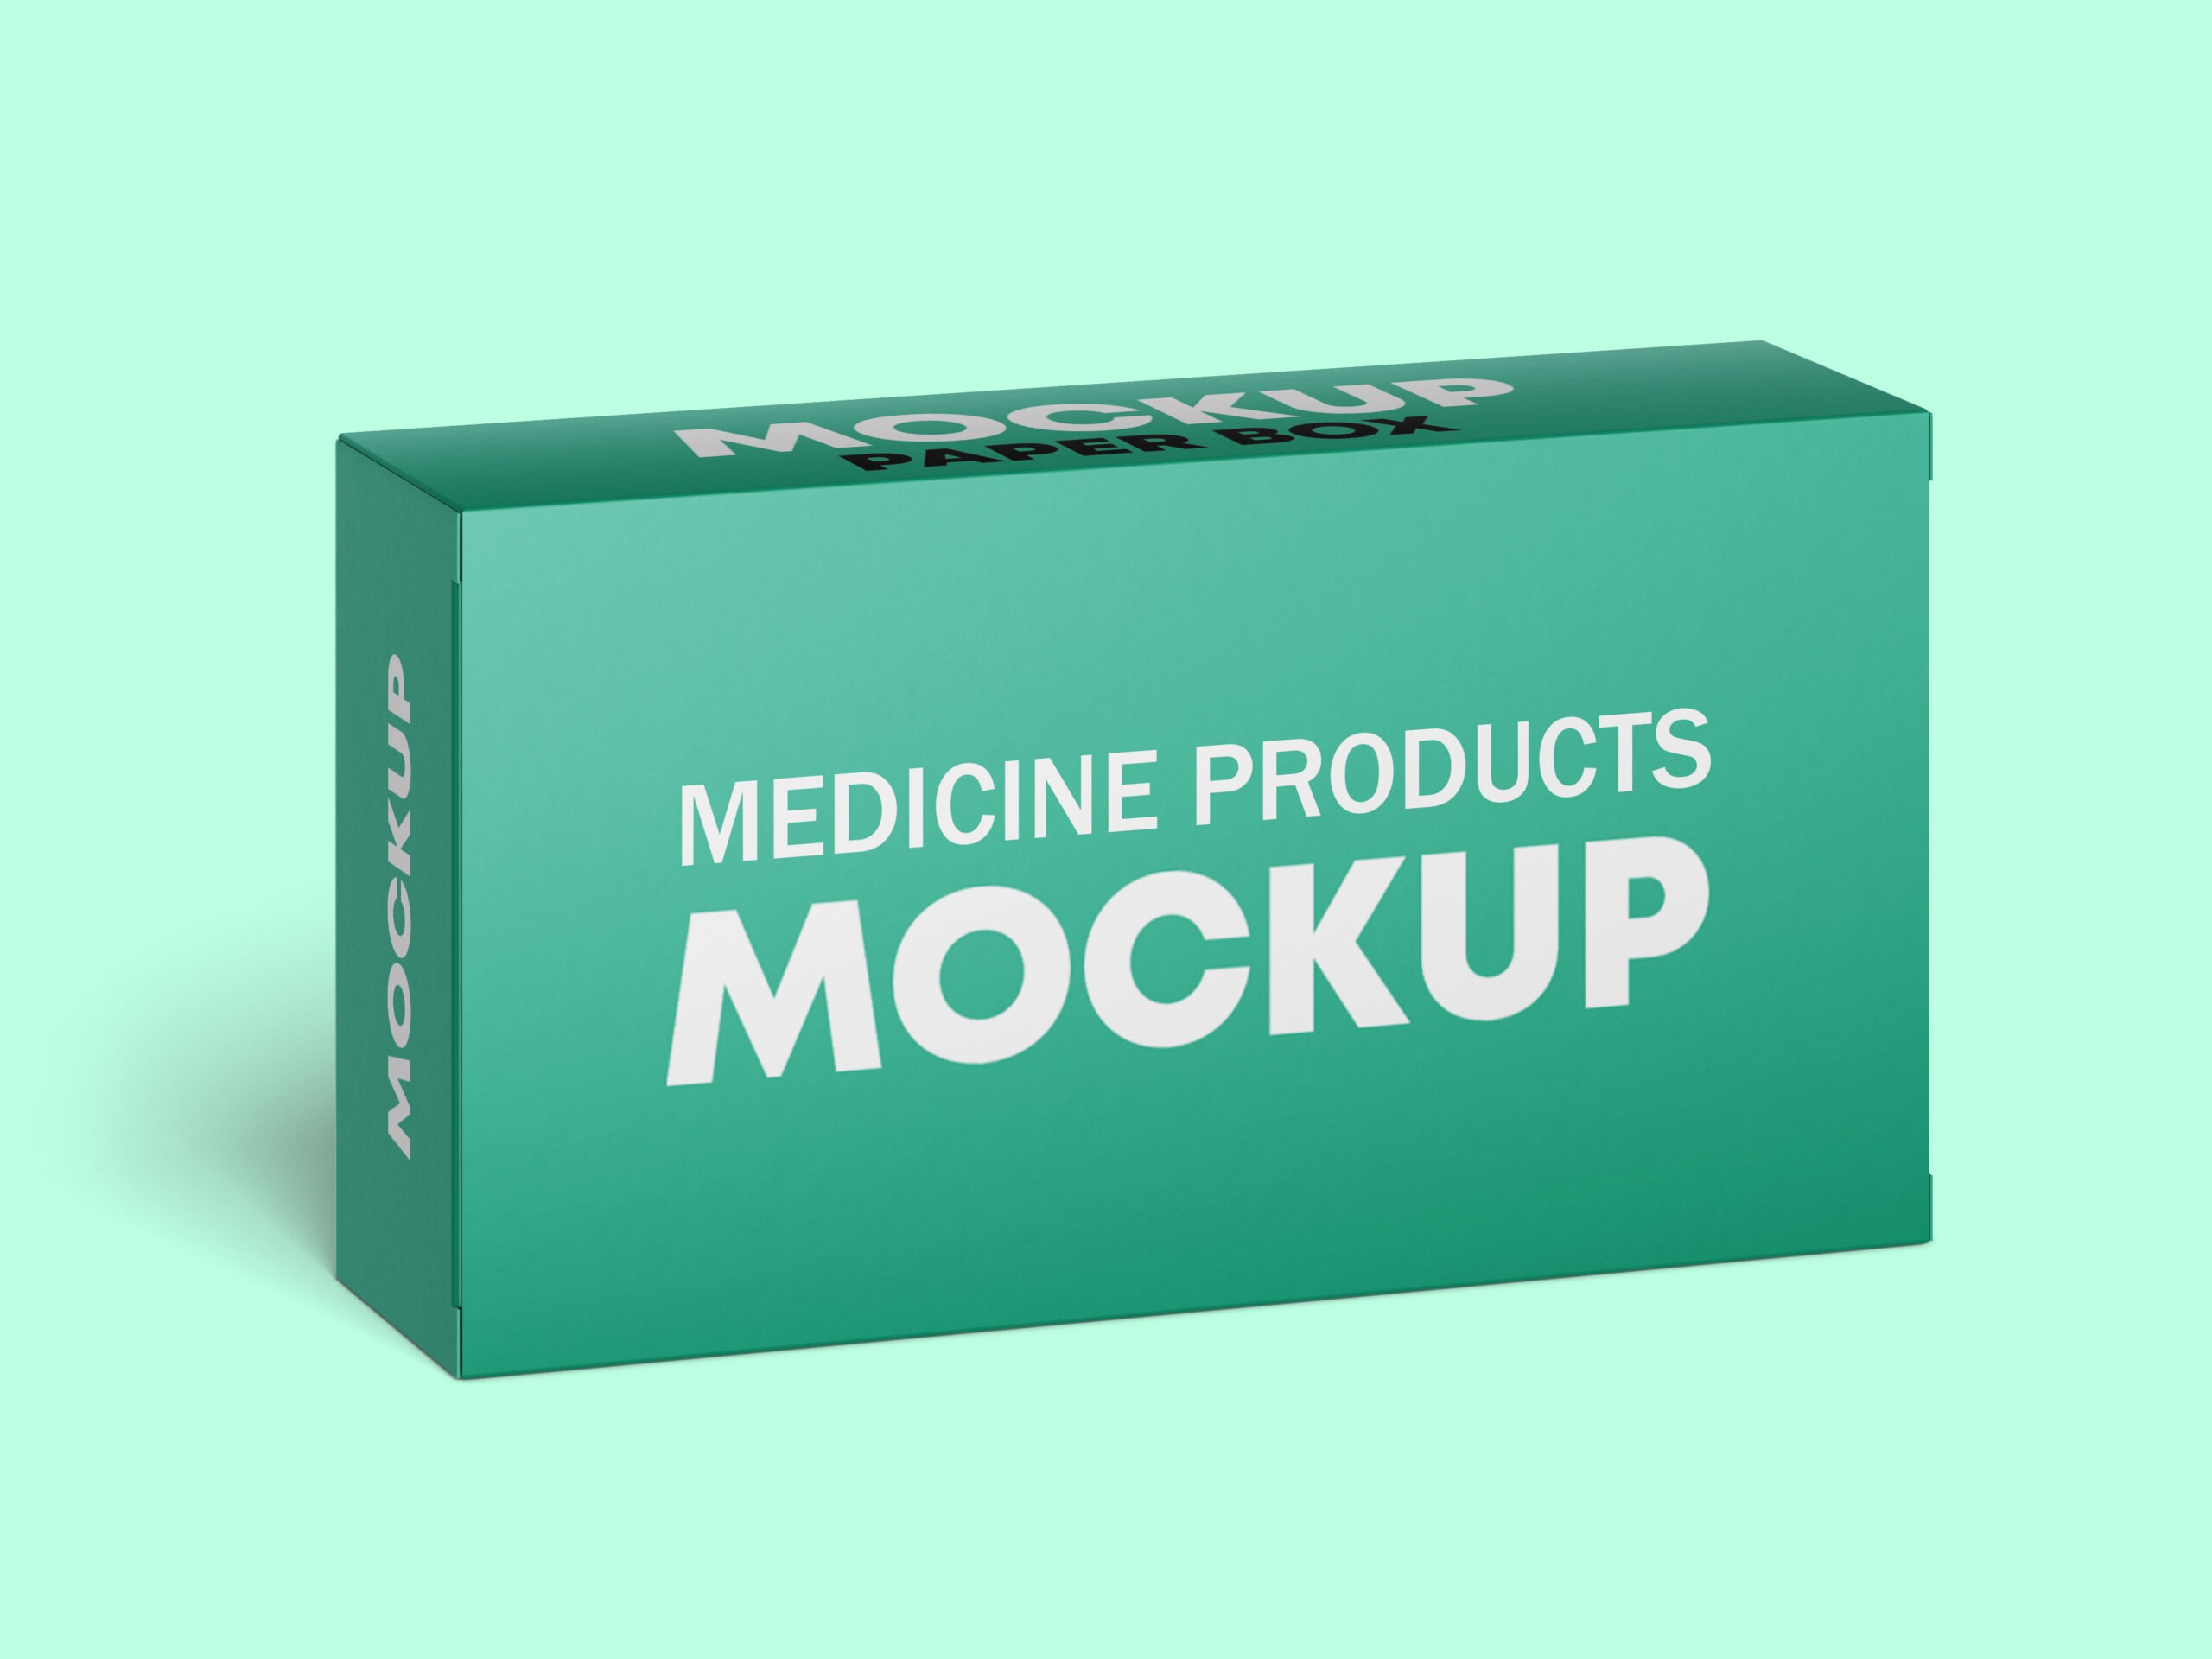 Medicine-Poducts-Mockup-free-download